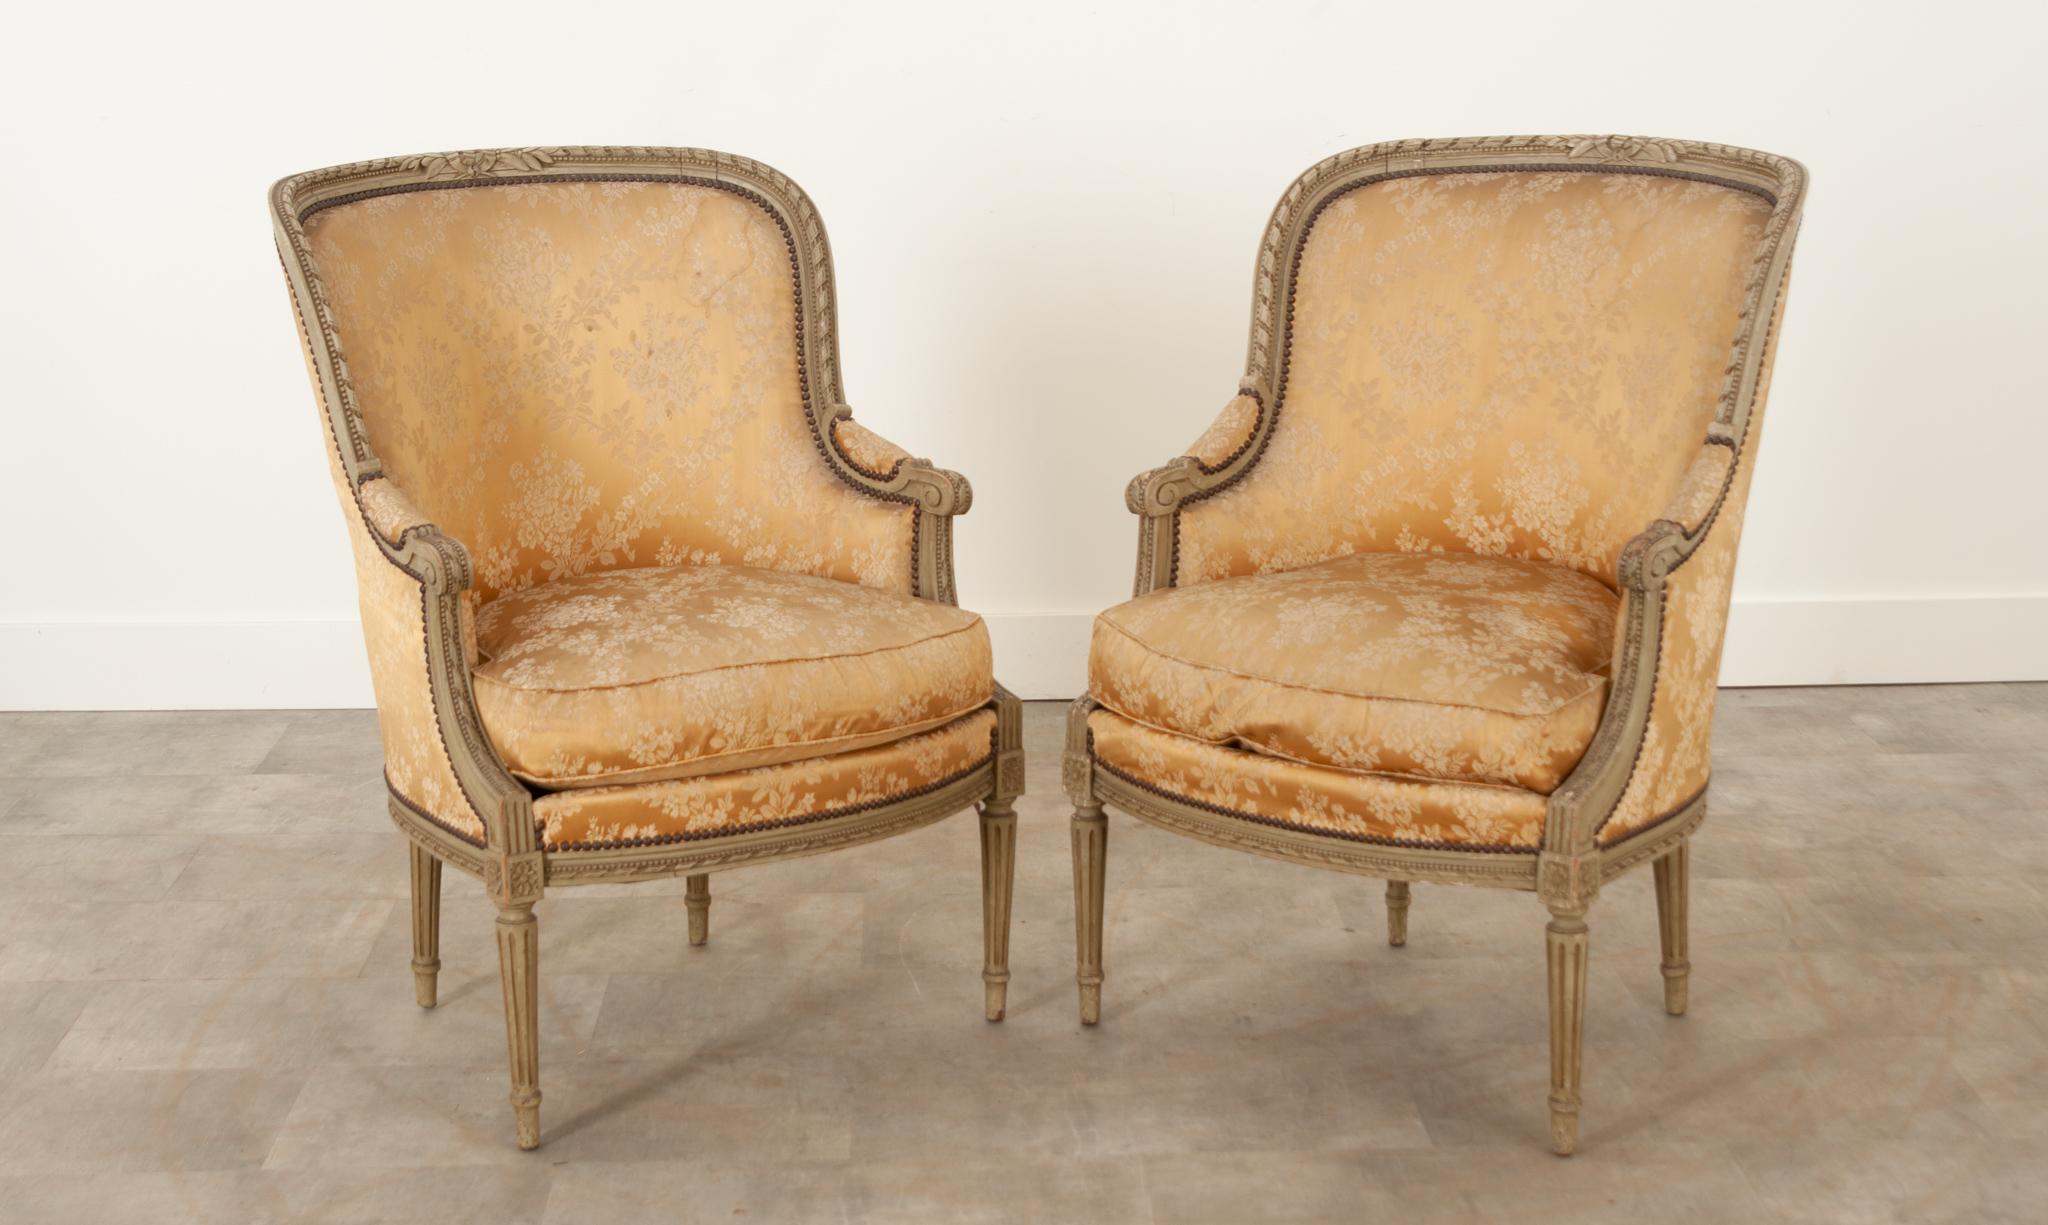 This pair of French Louis XVI-Style bergeres are in wonderful antique condition. The frames are 19th century, hand carved with a twisted ribbon border and painted in its original worn gray finish. Upholstered in elegant champagne toned, silk floral